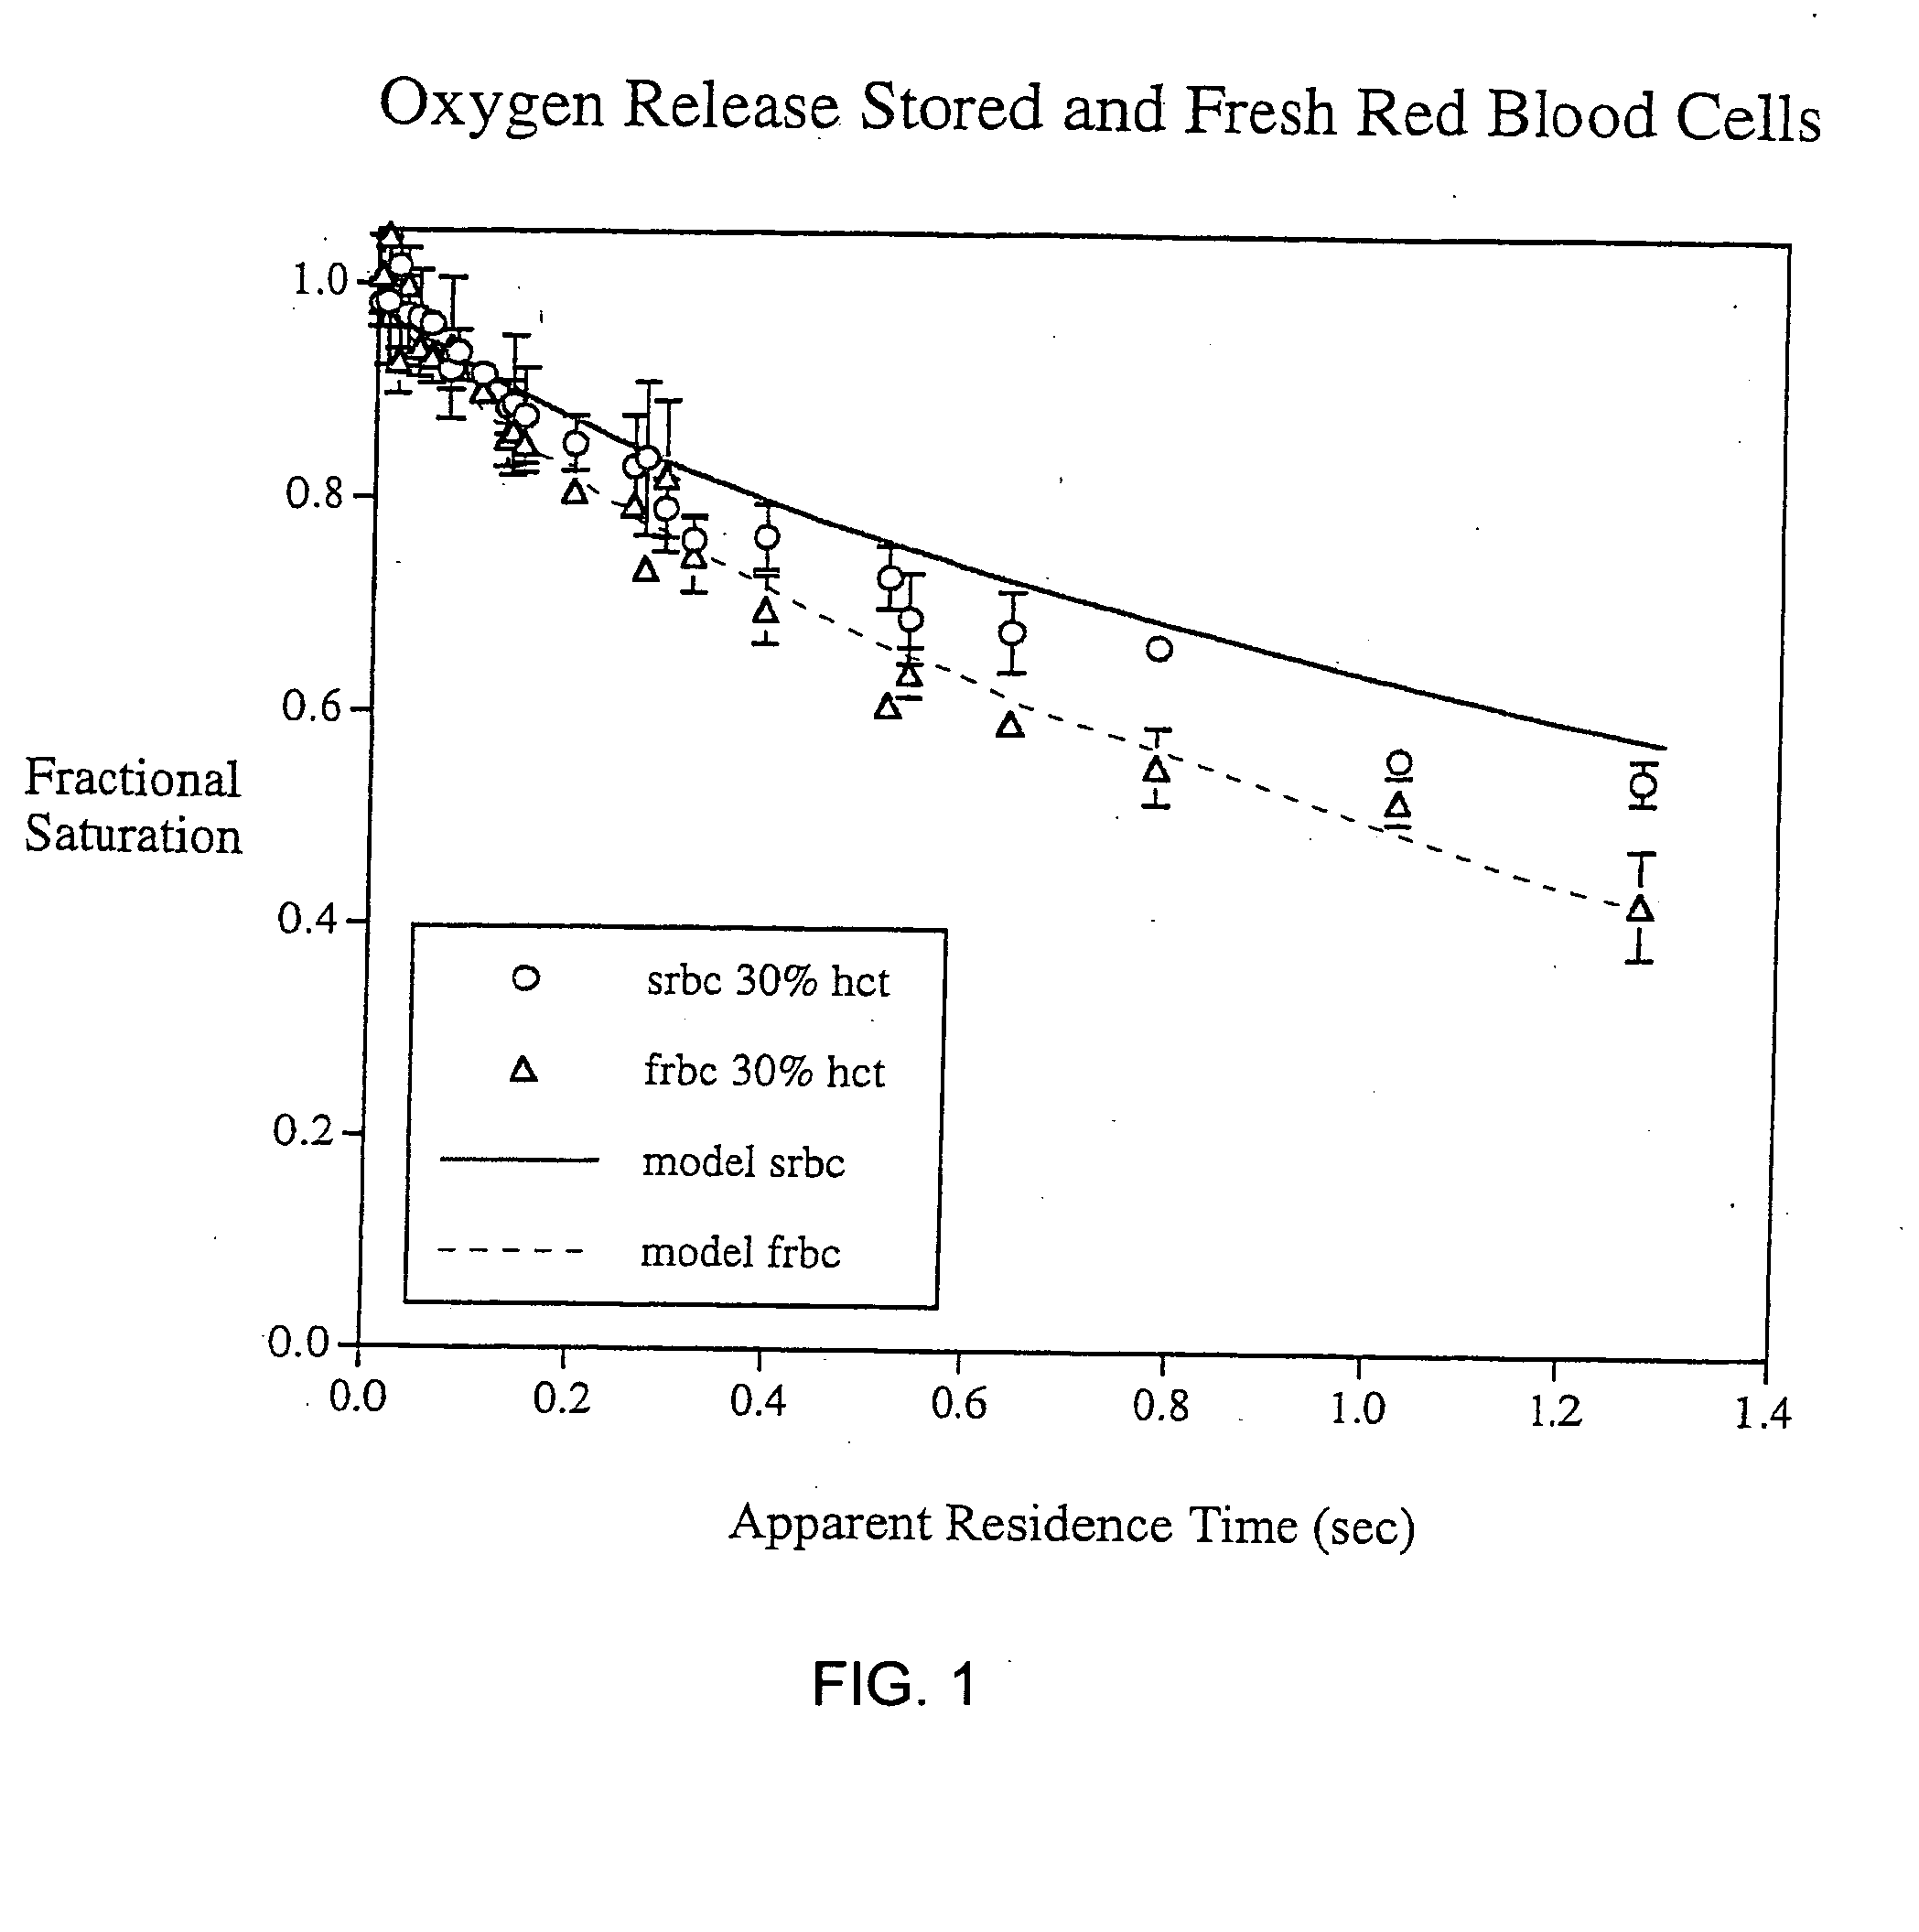 Method for improving oxygen transport by stored red blood cells